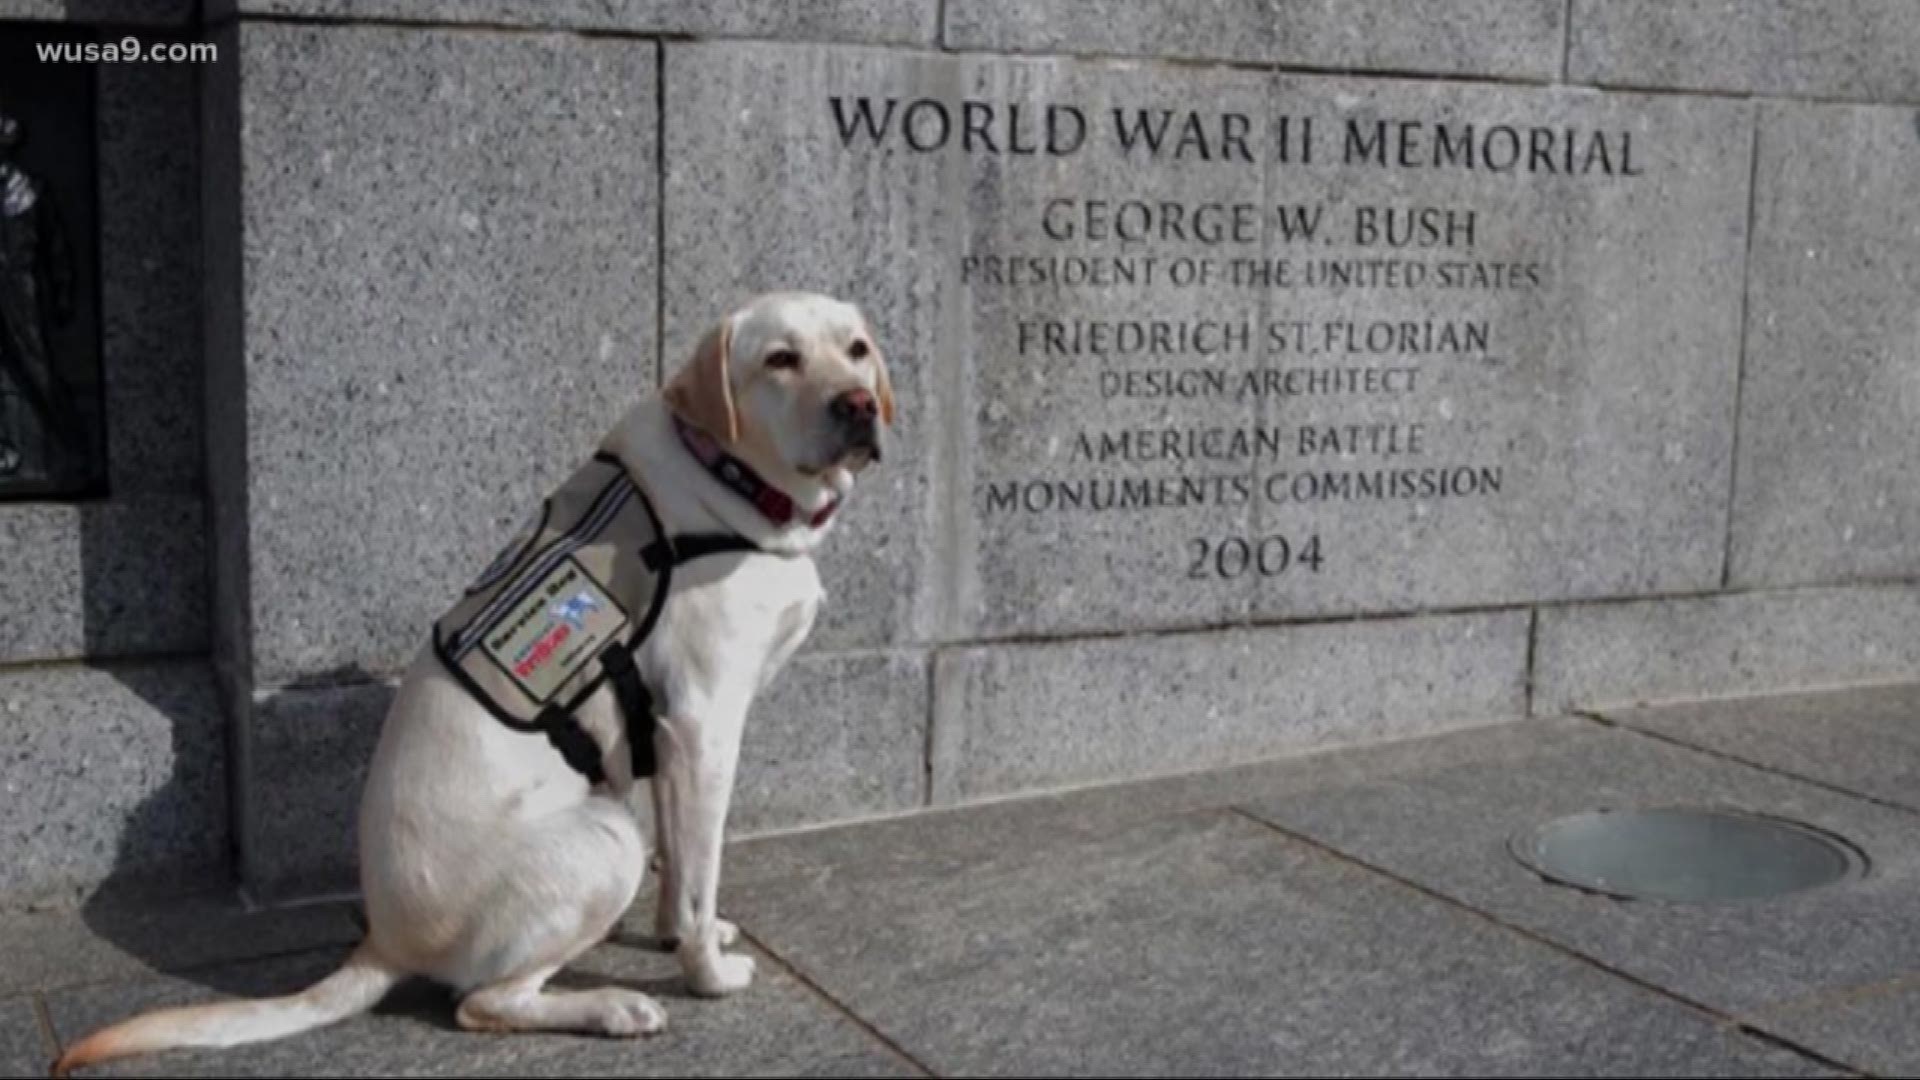 Sully the service dog has a heartfelt message to his former owner, the late President H.W. Bush, for Memorial Day.